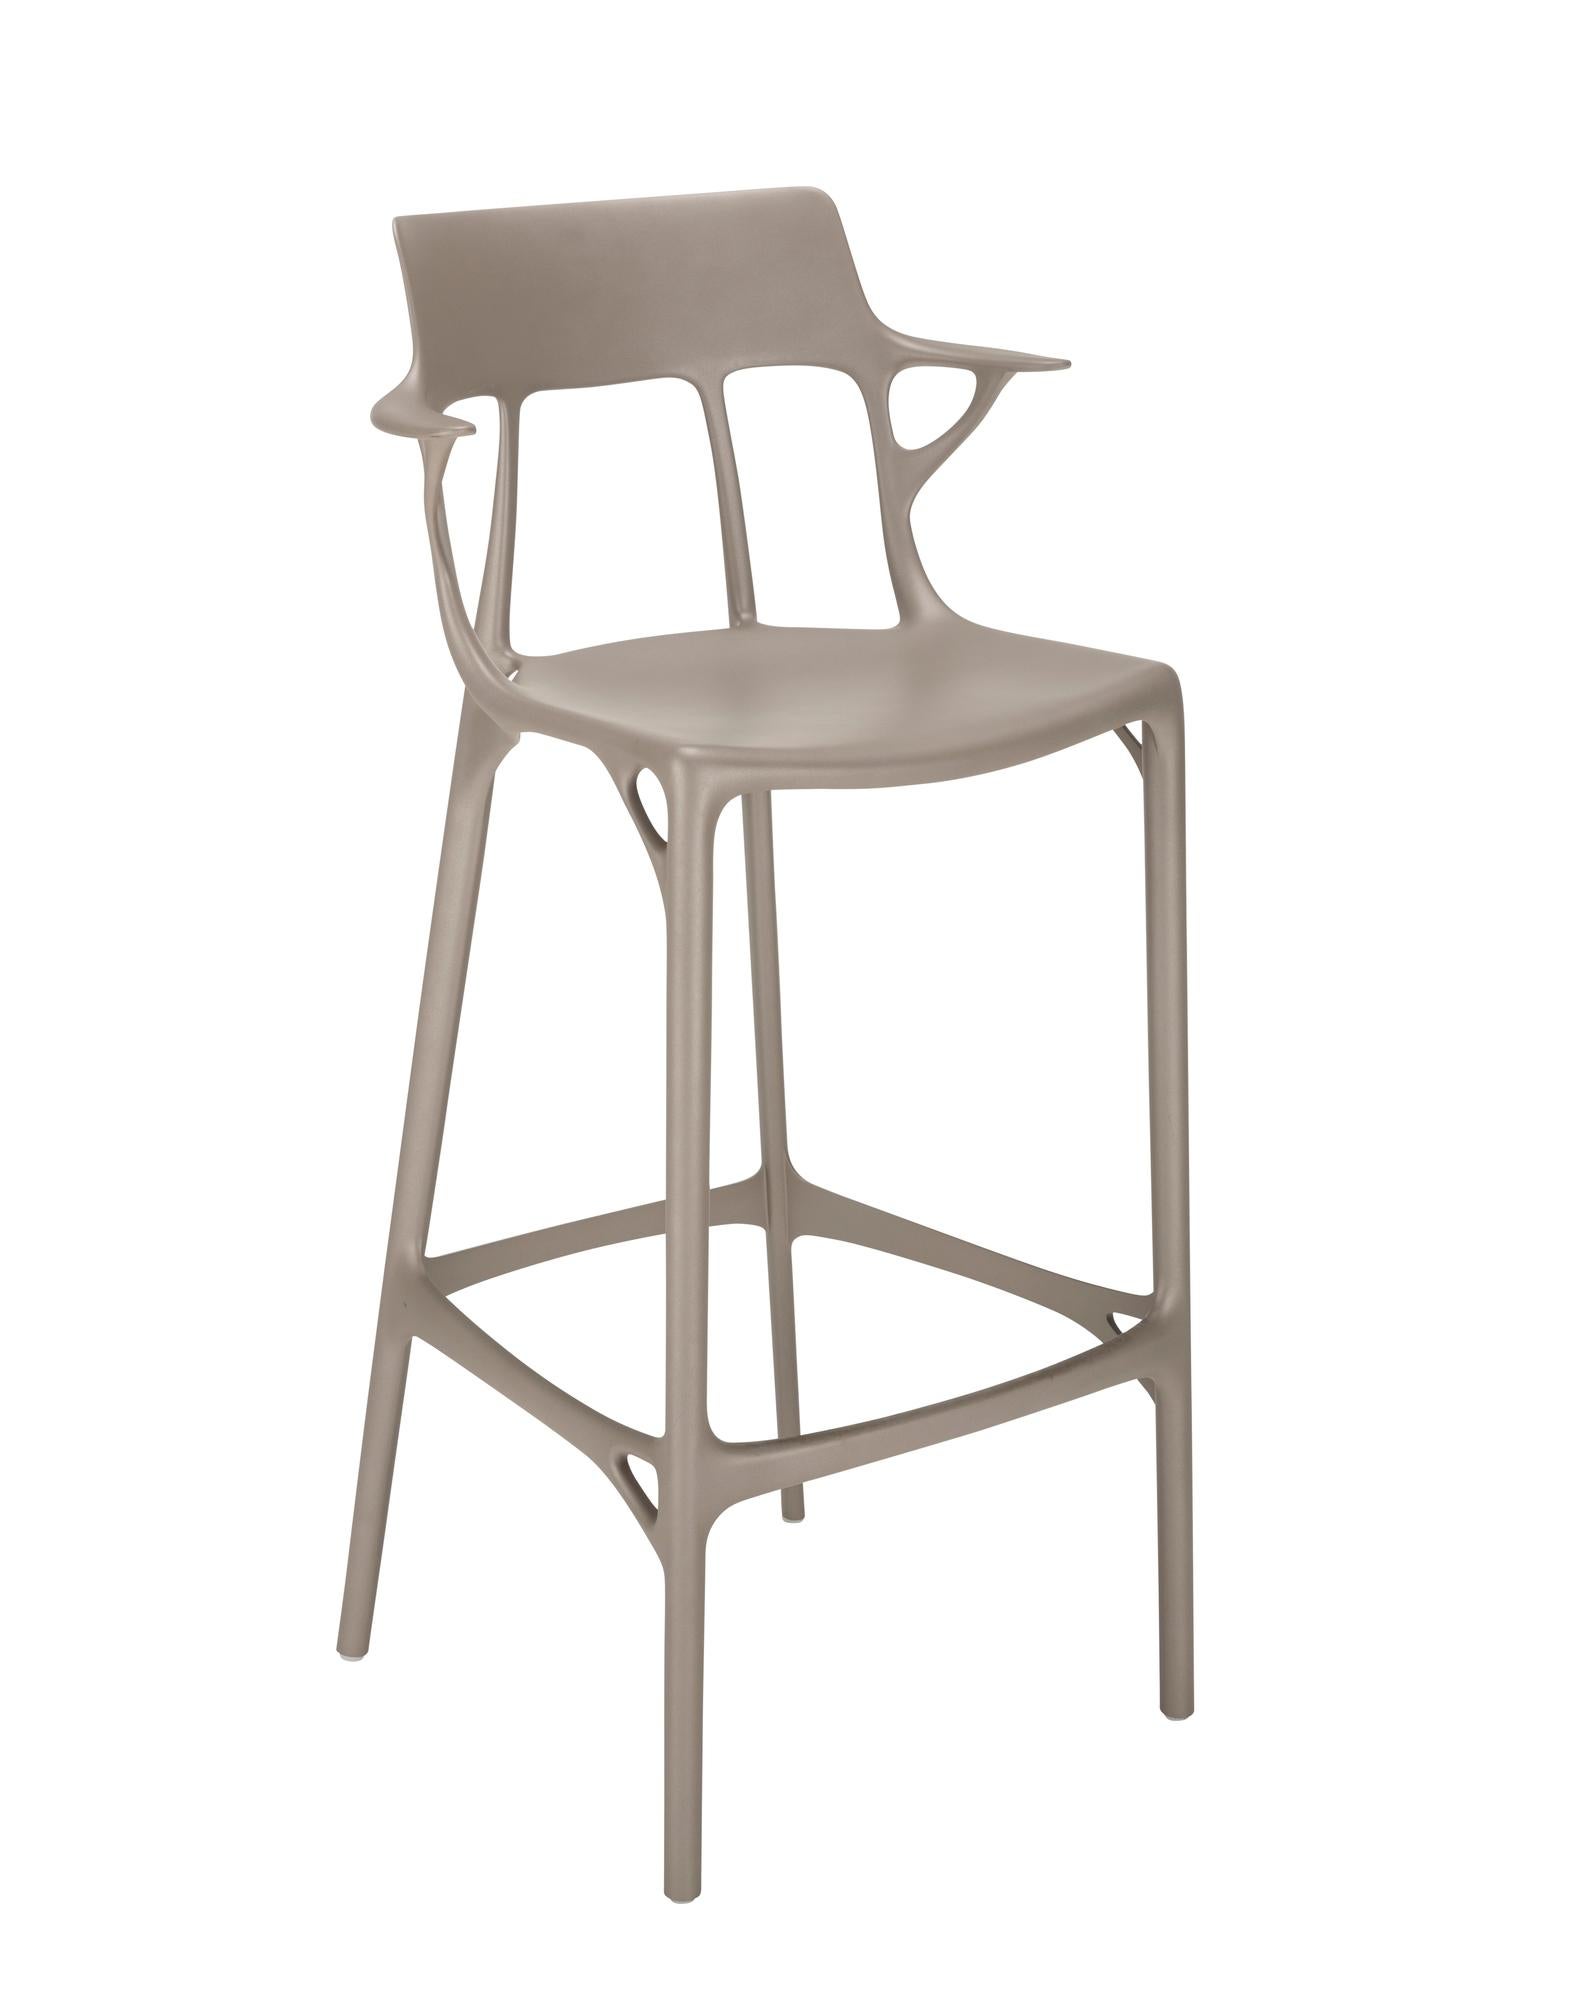 philippe starck for kartell masters bar chair